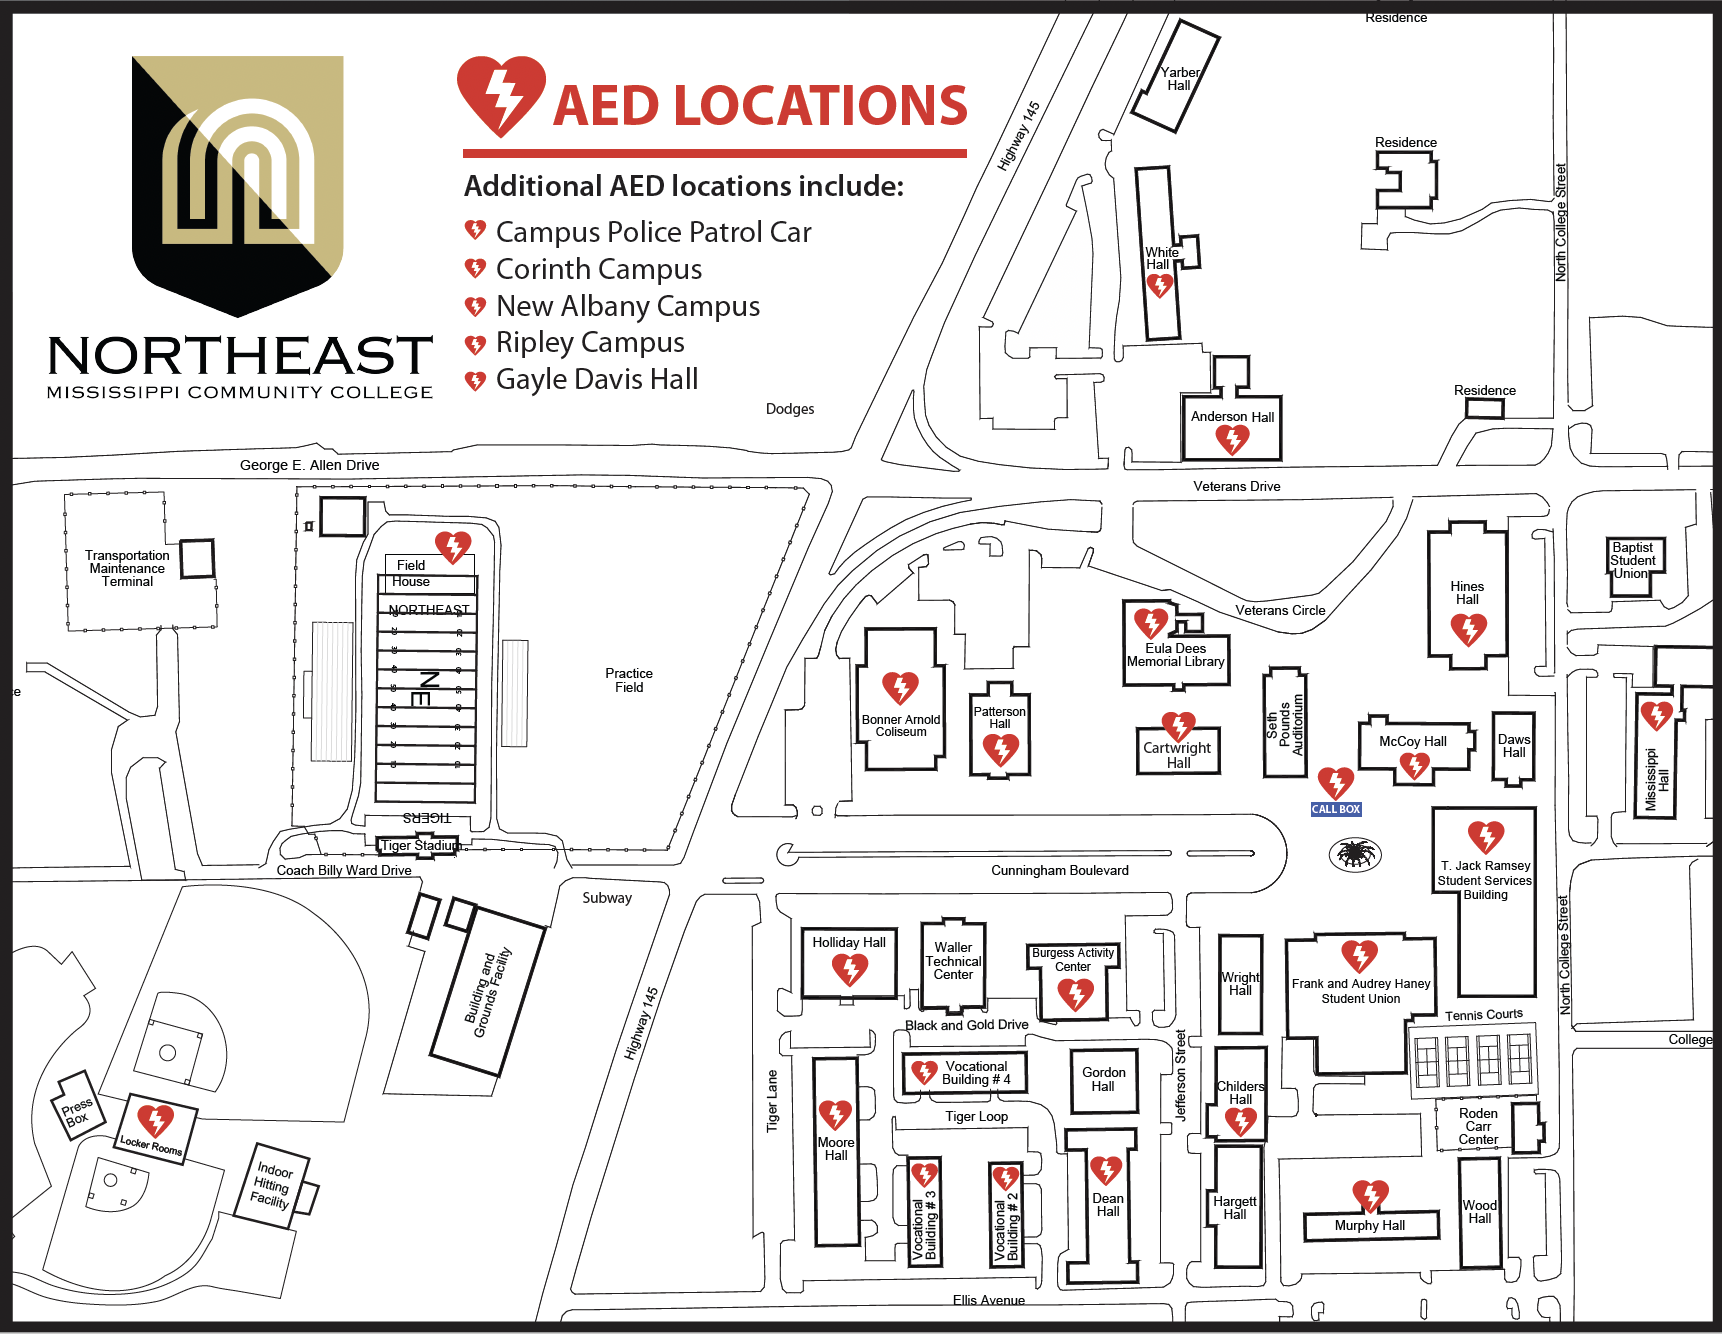 AED Locations